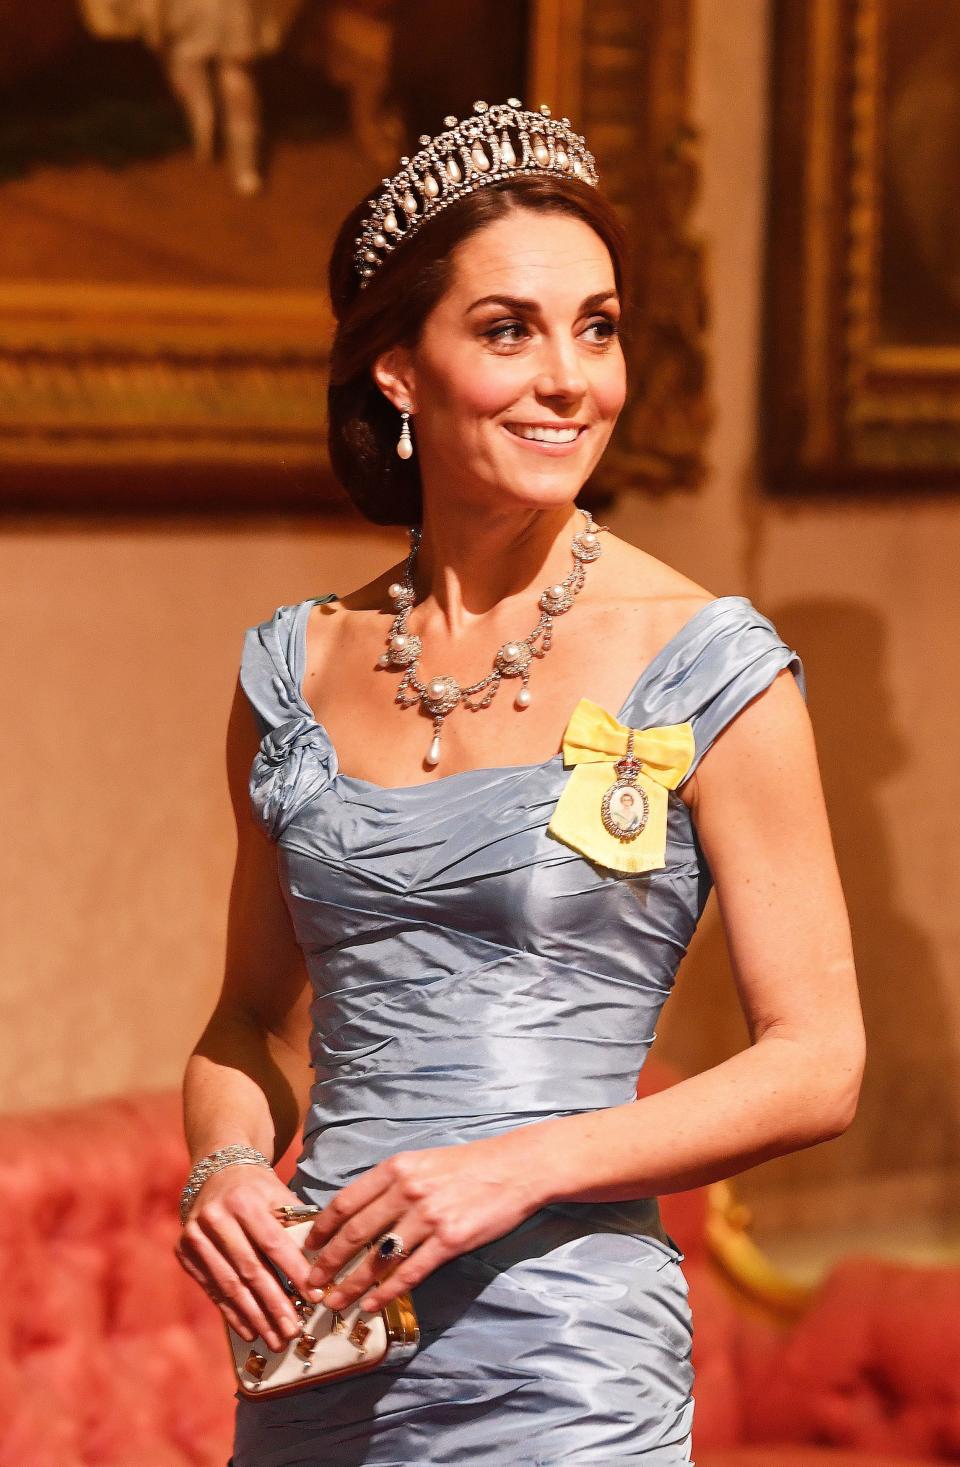 The Duchess of Cambridge attending a state banquet in honor of the King and Queen of the Netherlands